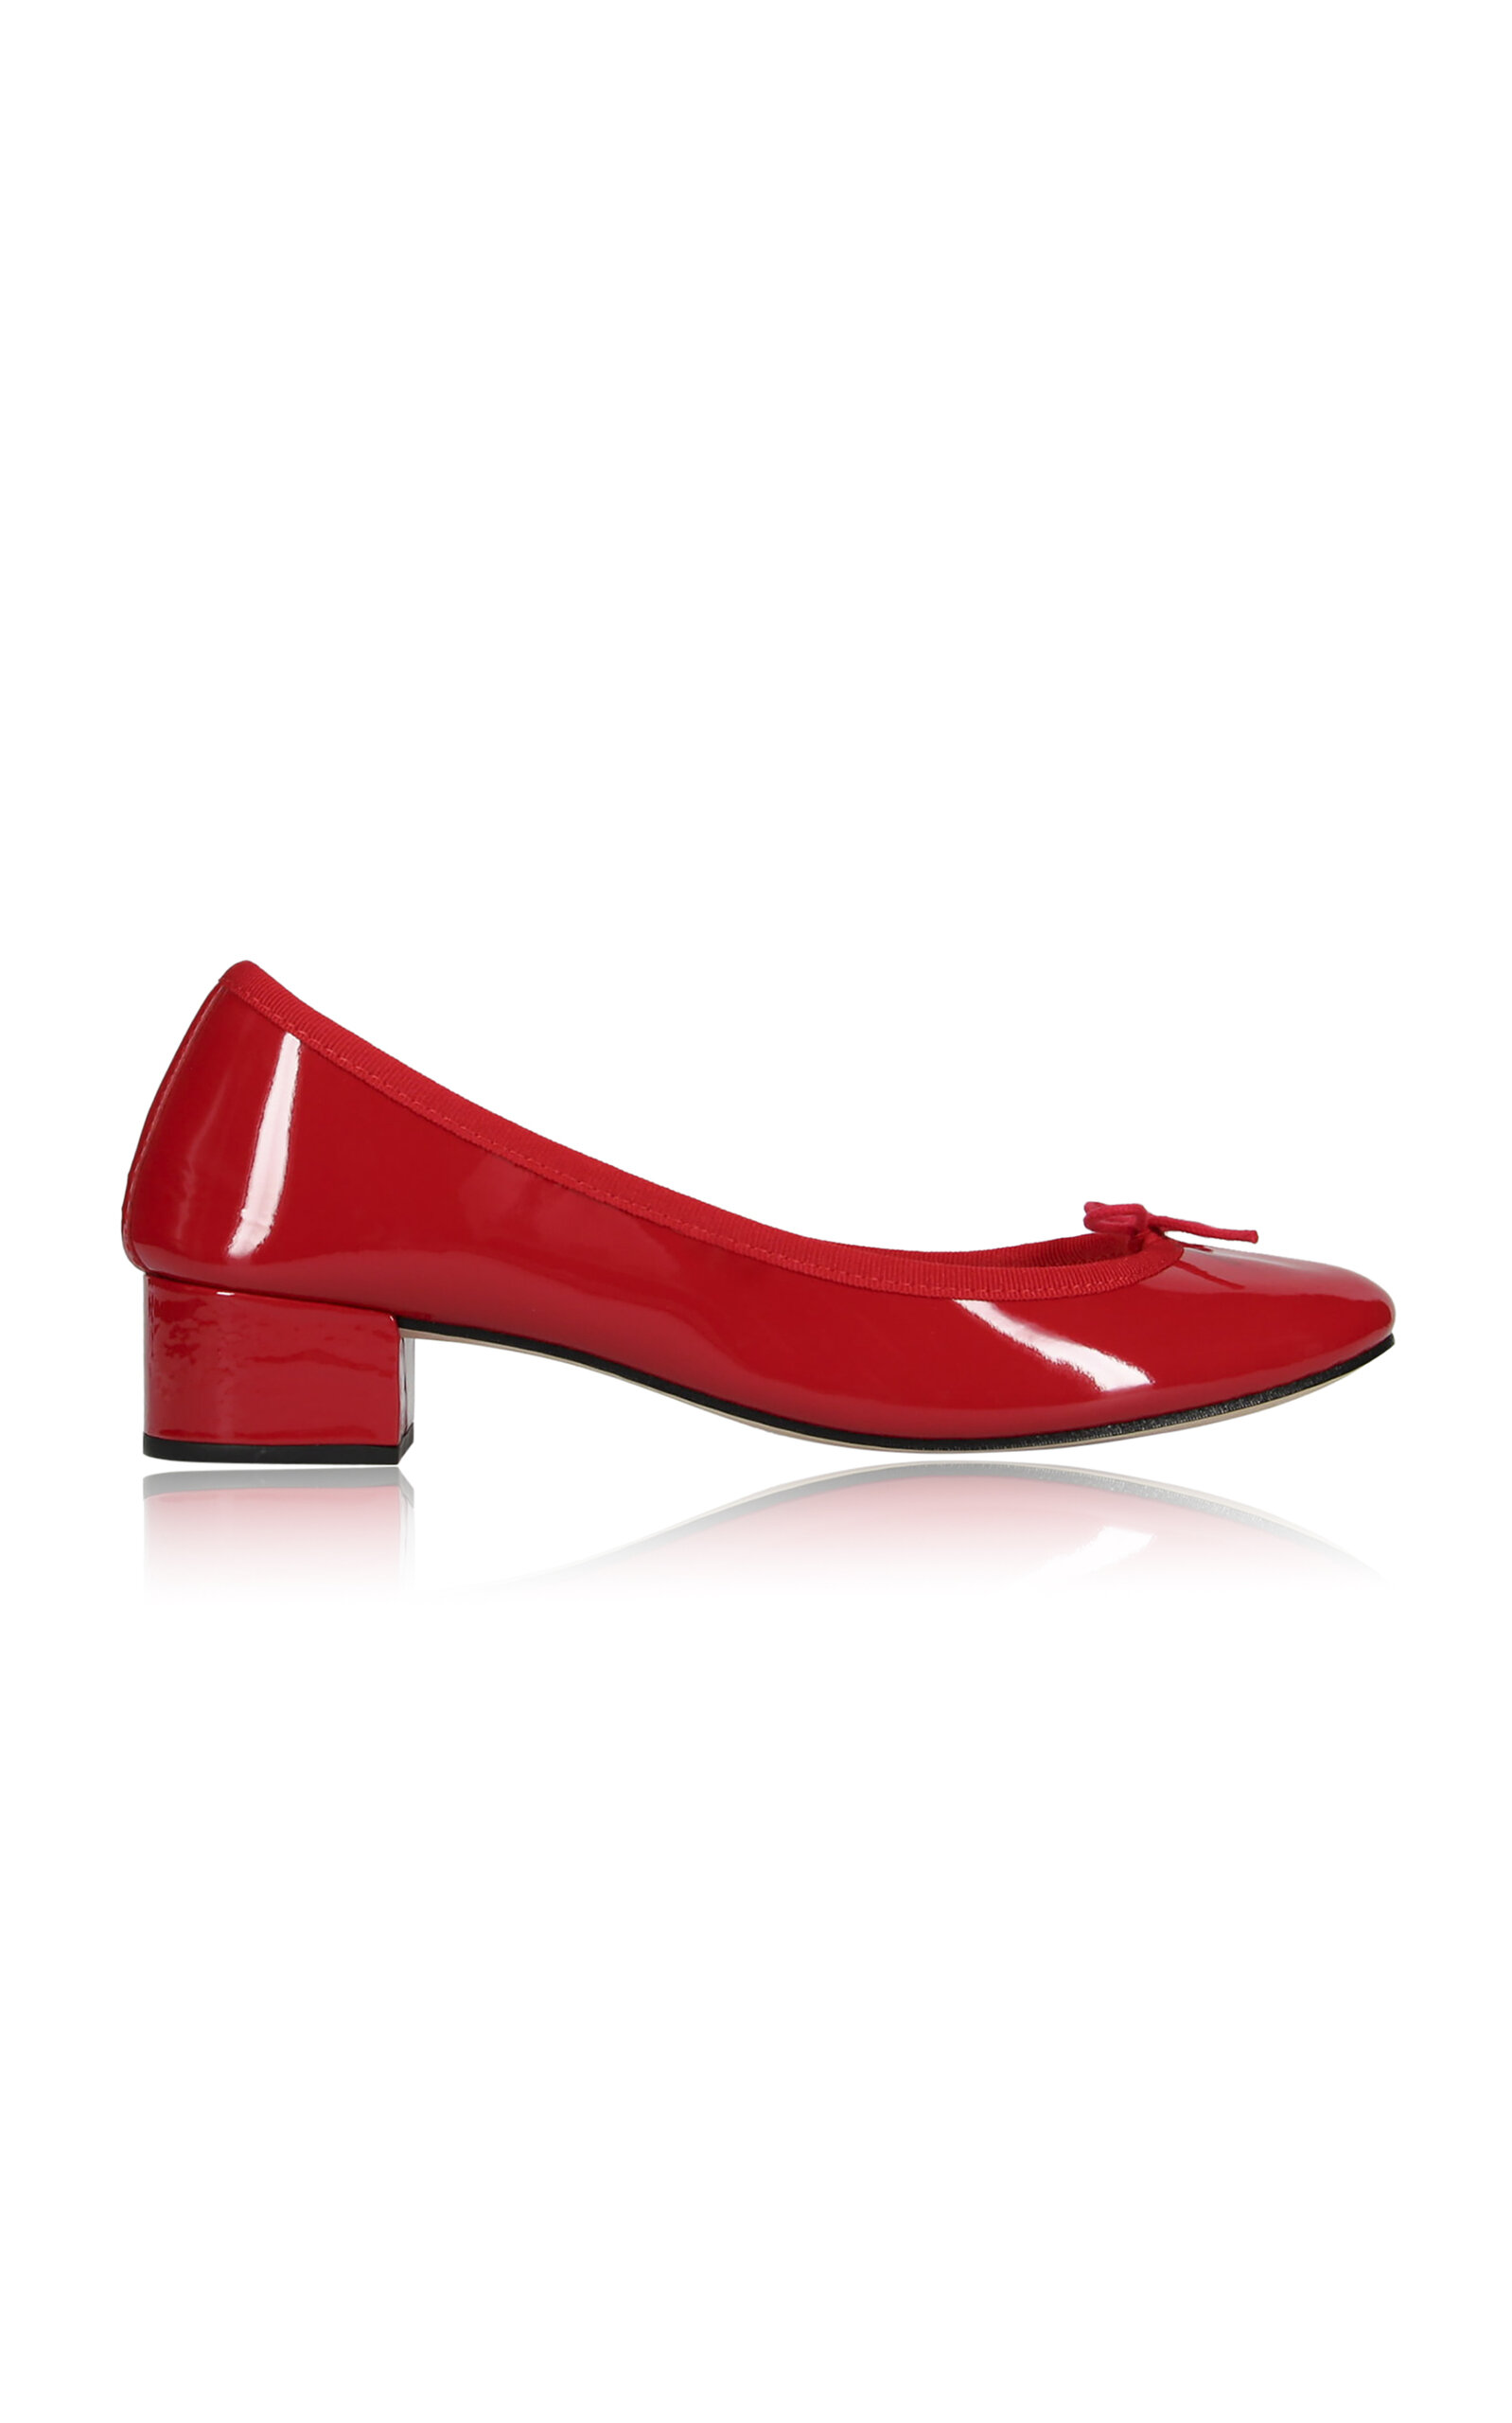 Repetto Camille Patent Leather Kitten Heeled Ballerina Pumps In Red